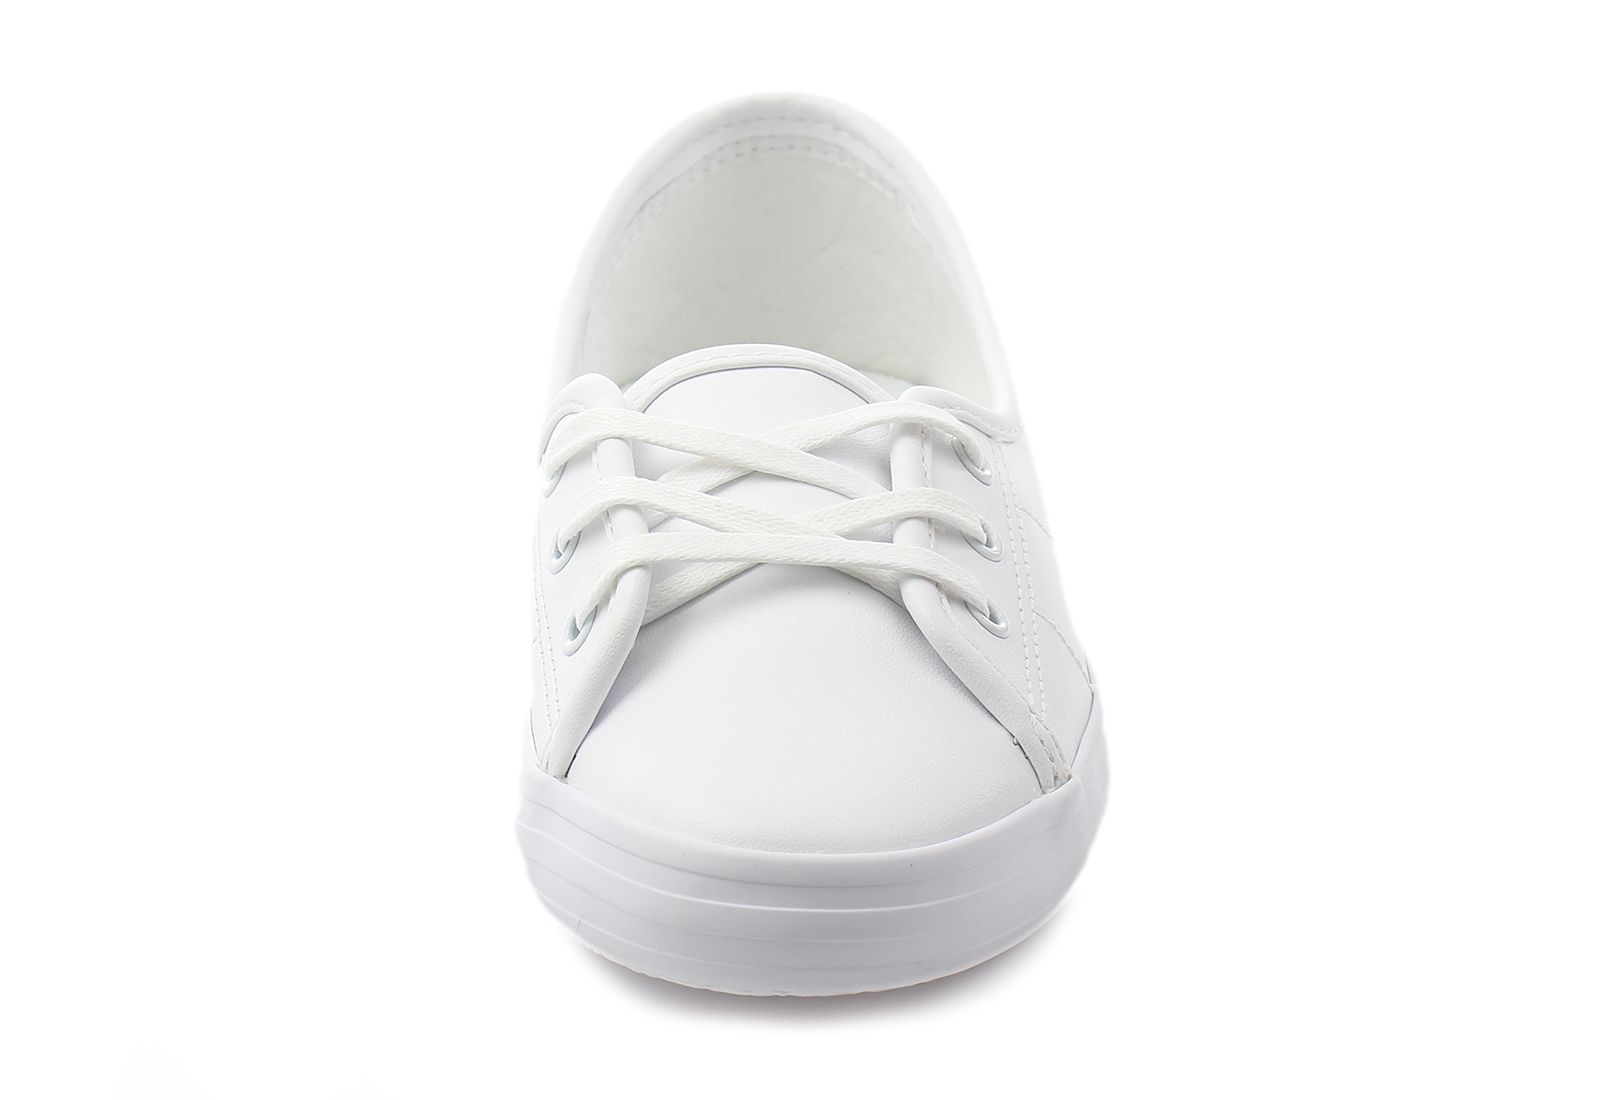 Lacoste Ballerinas - Ziane Chunky - 737CFA0063-21G - Online shop for ...